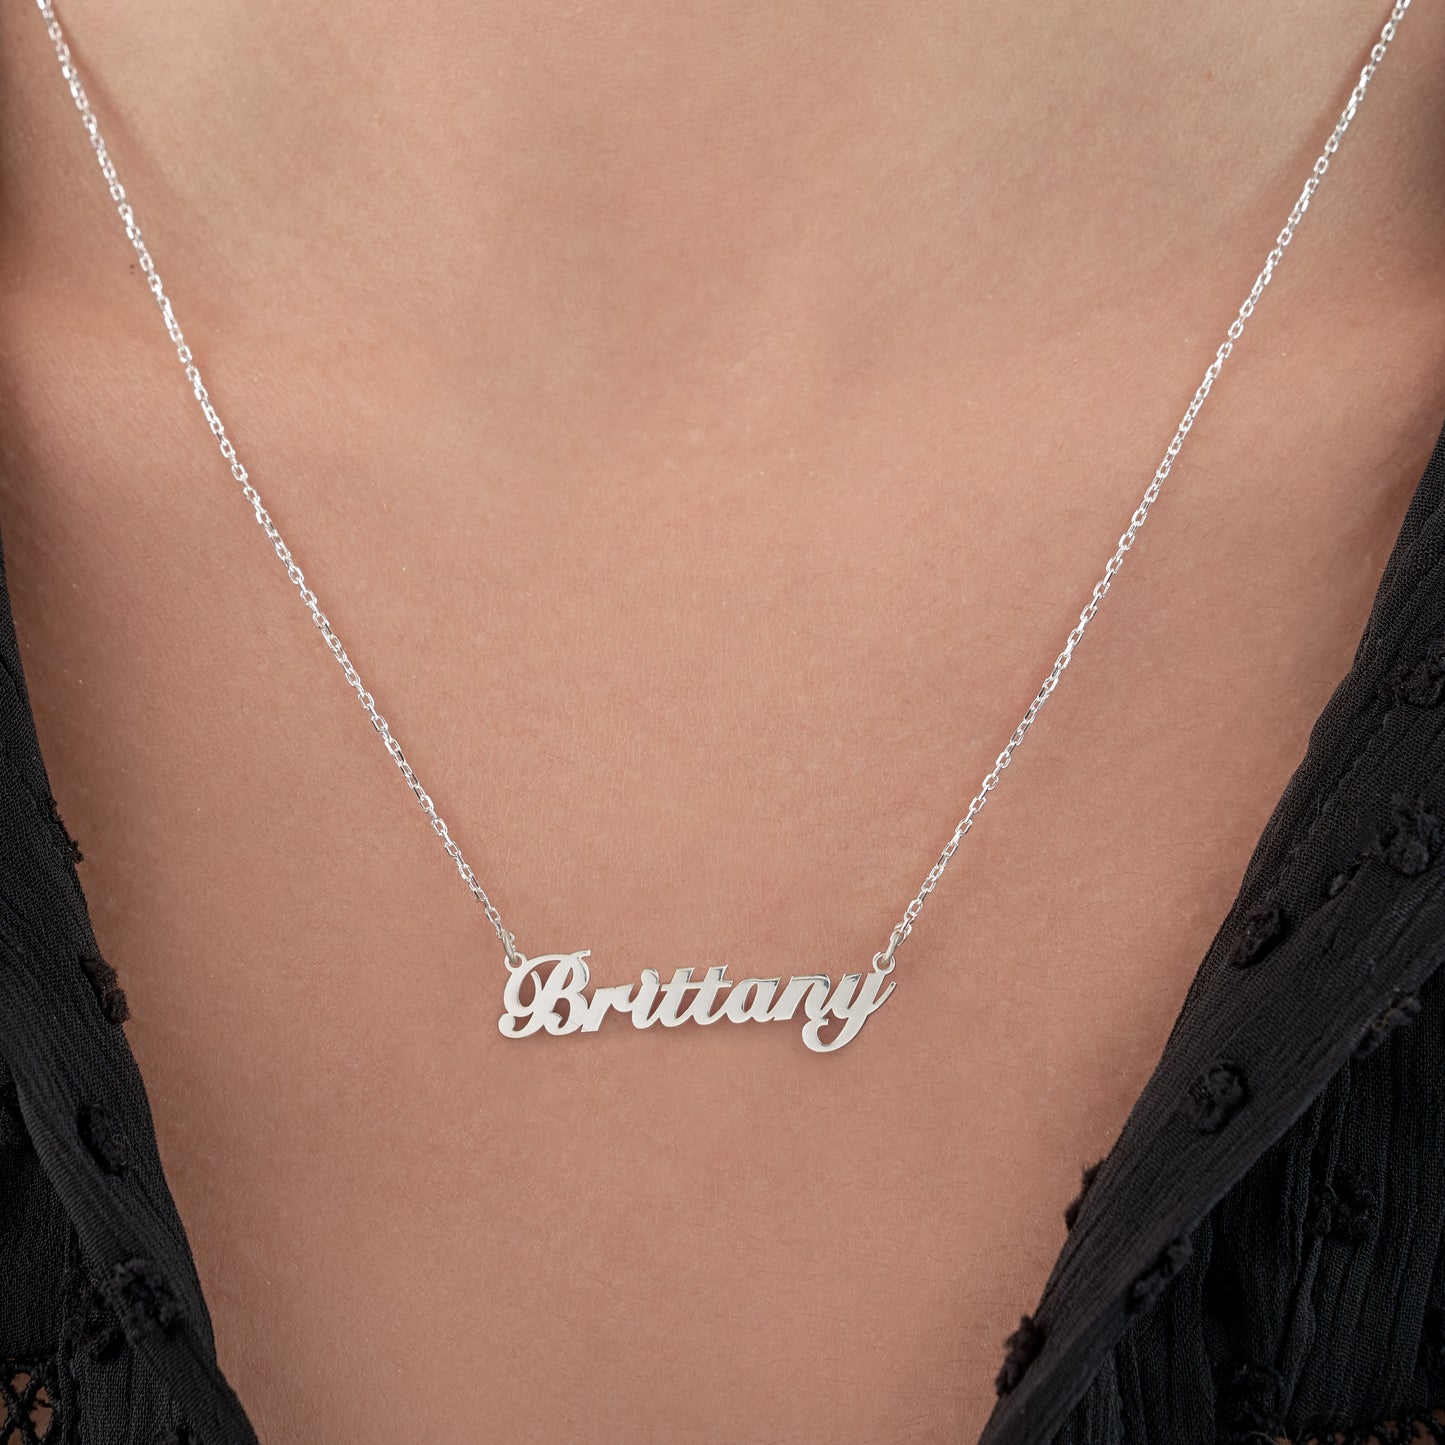 925 Sterling silver name necklace, Personalized Name Necklace, Personalized Jewelry, Name necklace, Personalized Gift, Christmas gift, MF35